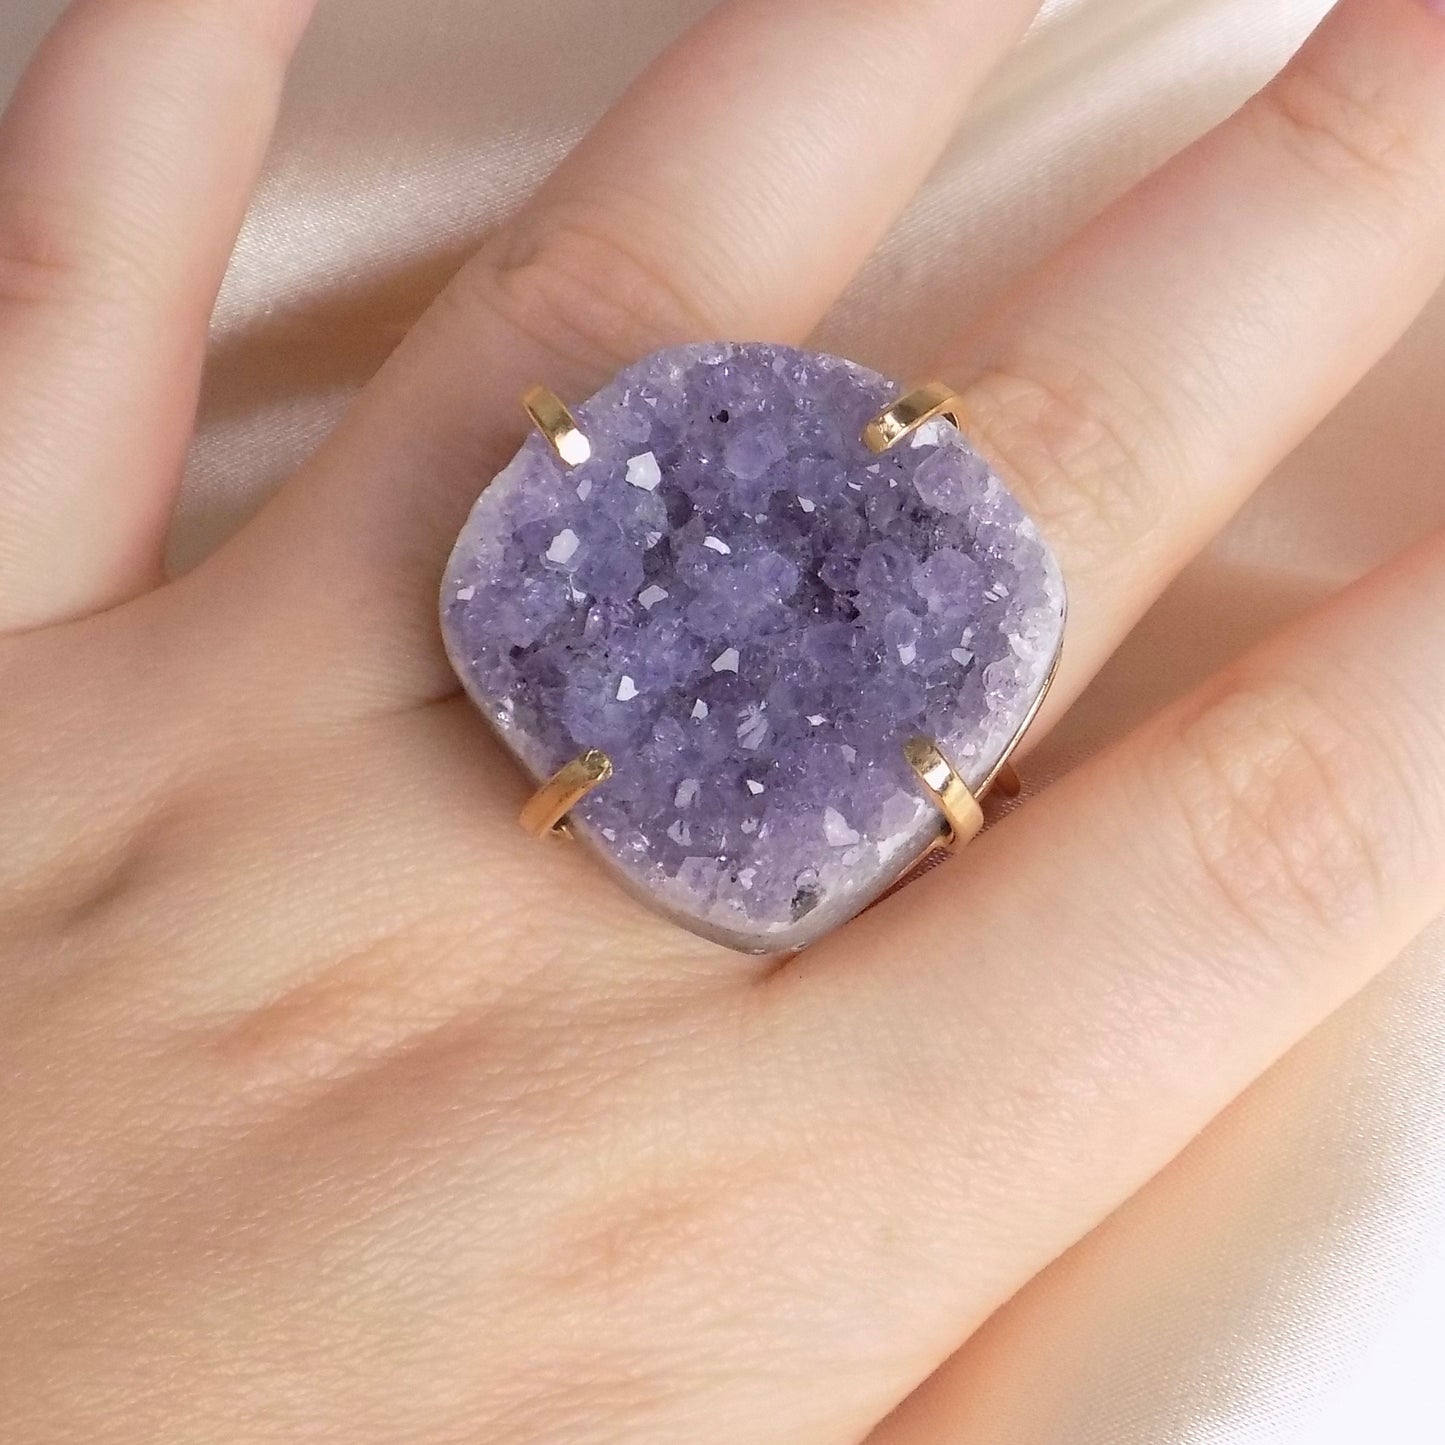 Large Amethyst Ring Gold Adjustable, Purple Raw Druzy Ring For Women, Statement Crystal Ring, Christmas Gift Women, G15-149